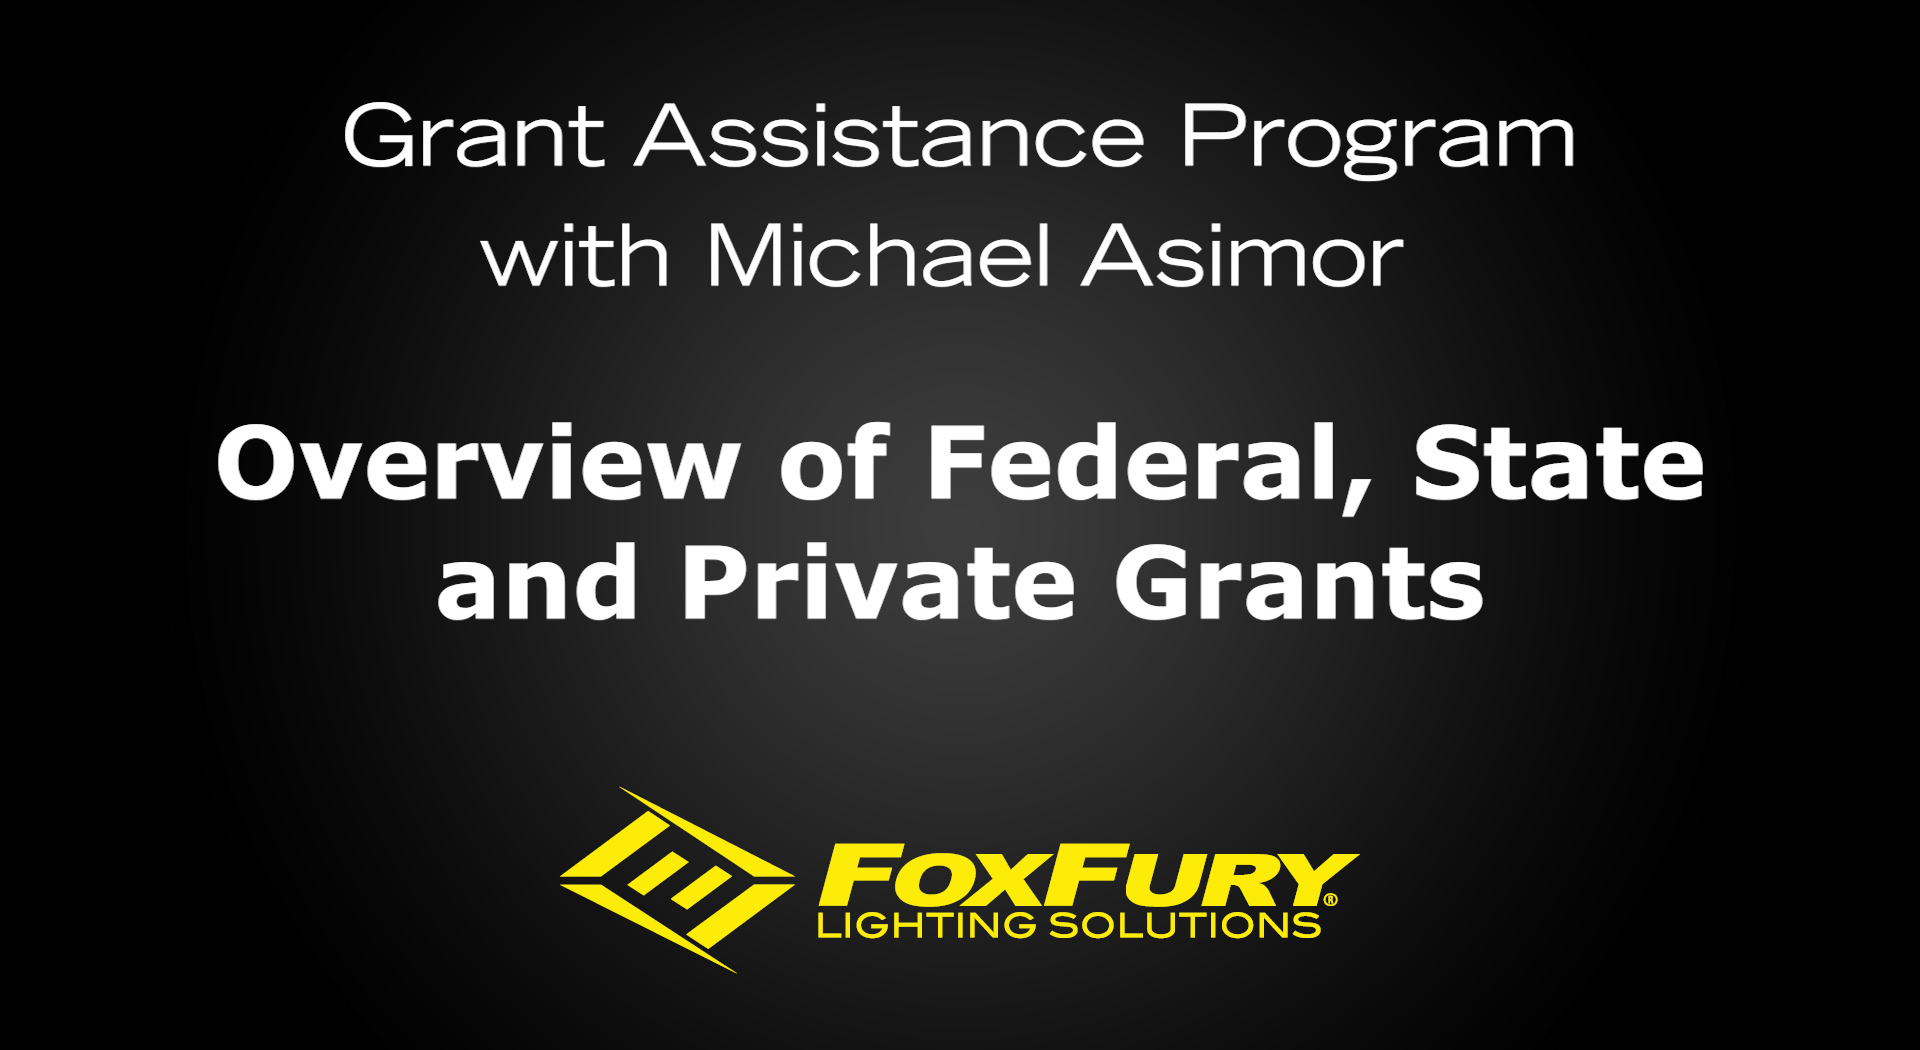 Overview of Federal, State, and Private Grants video